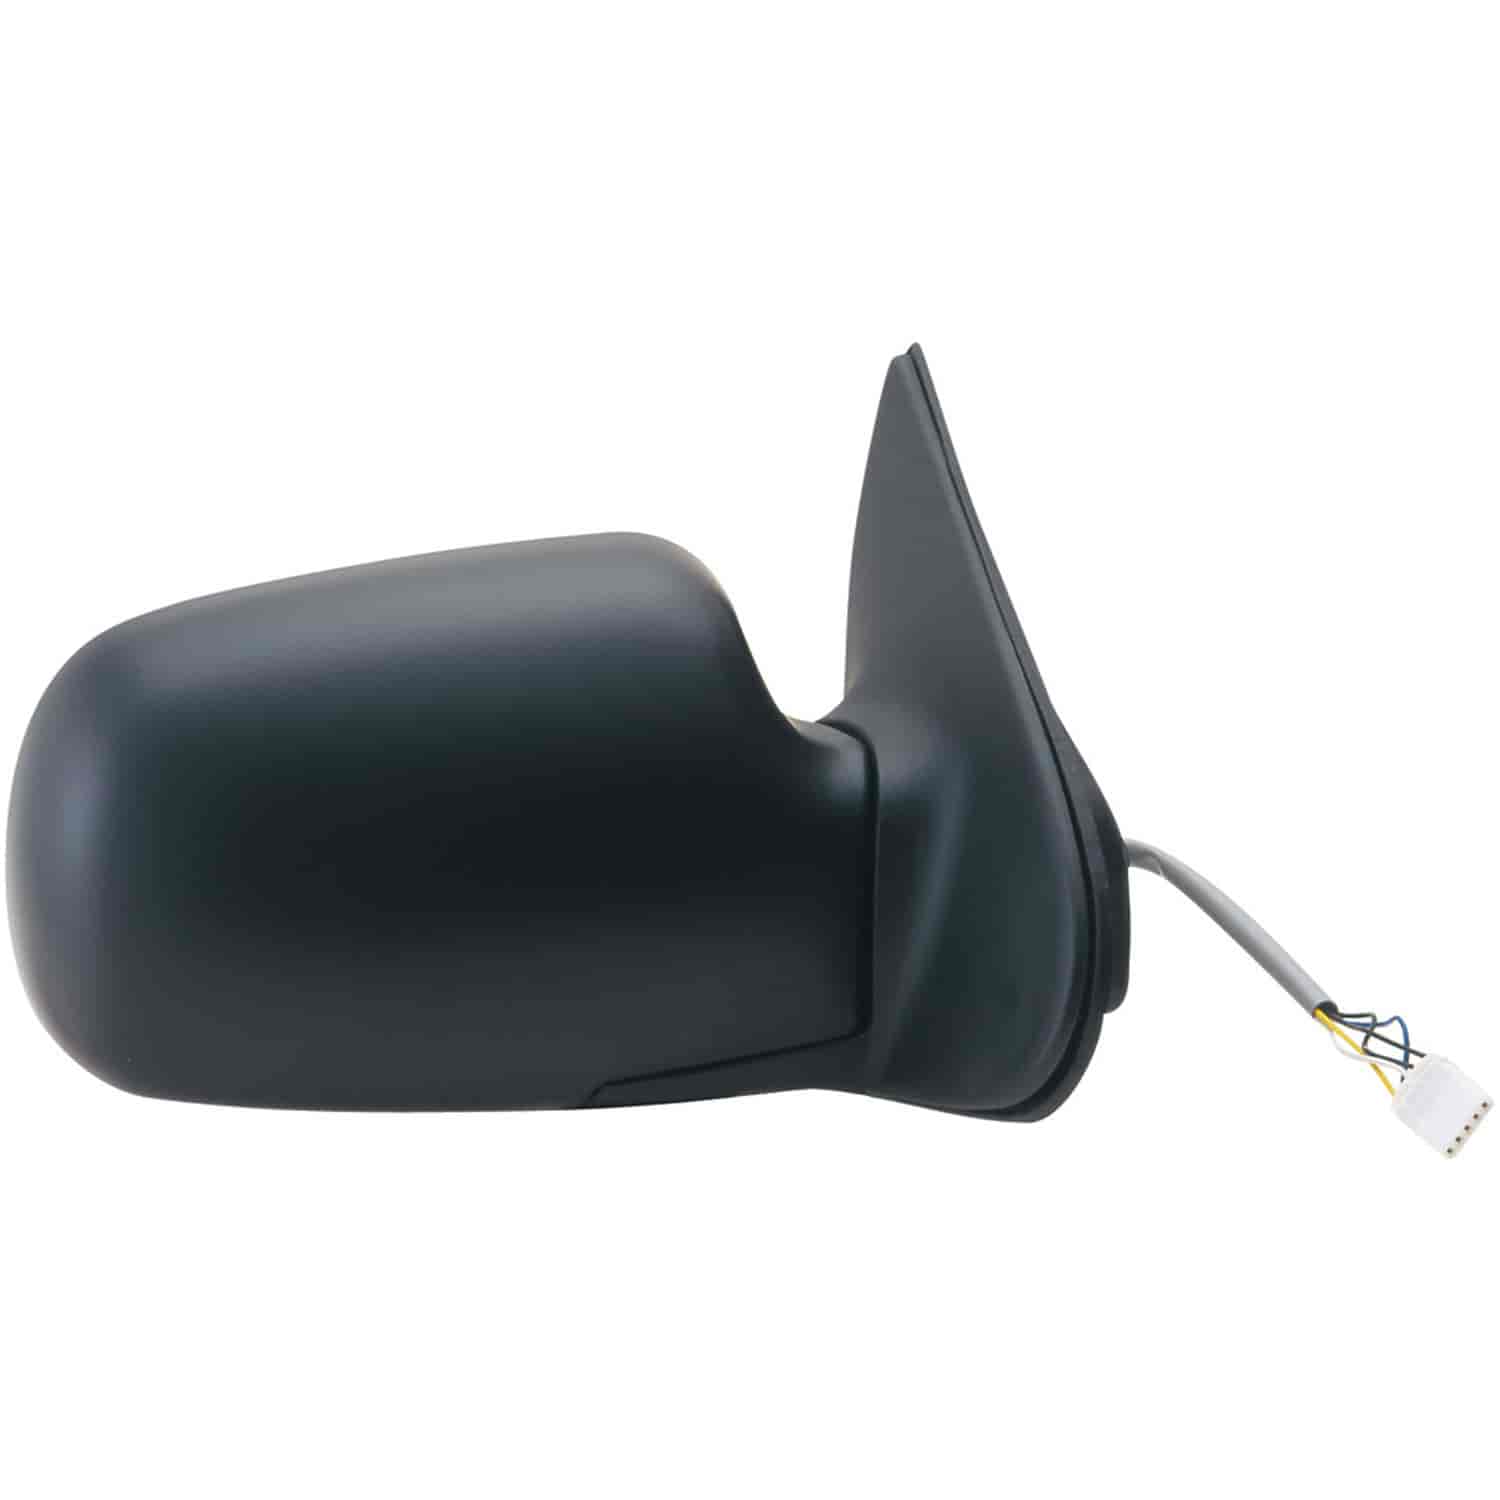 OEM Style Replacement mirror for 96-98 Mercury Villager;